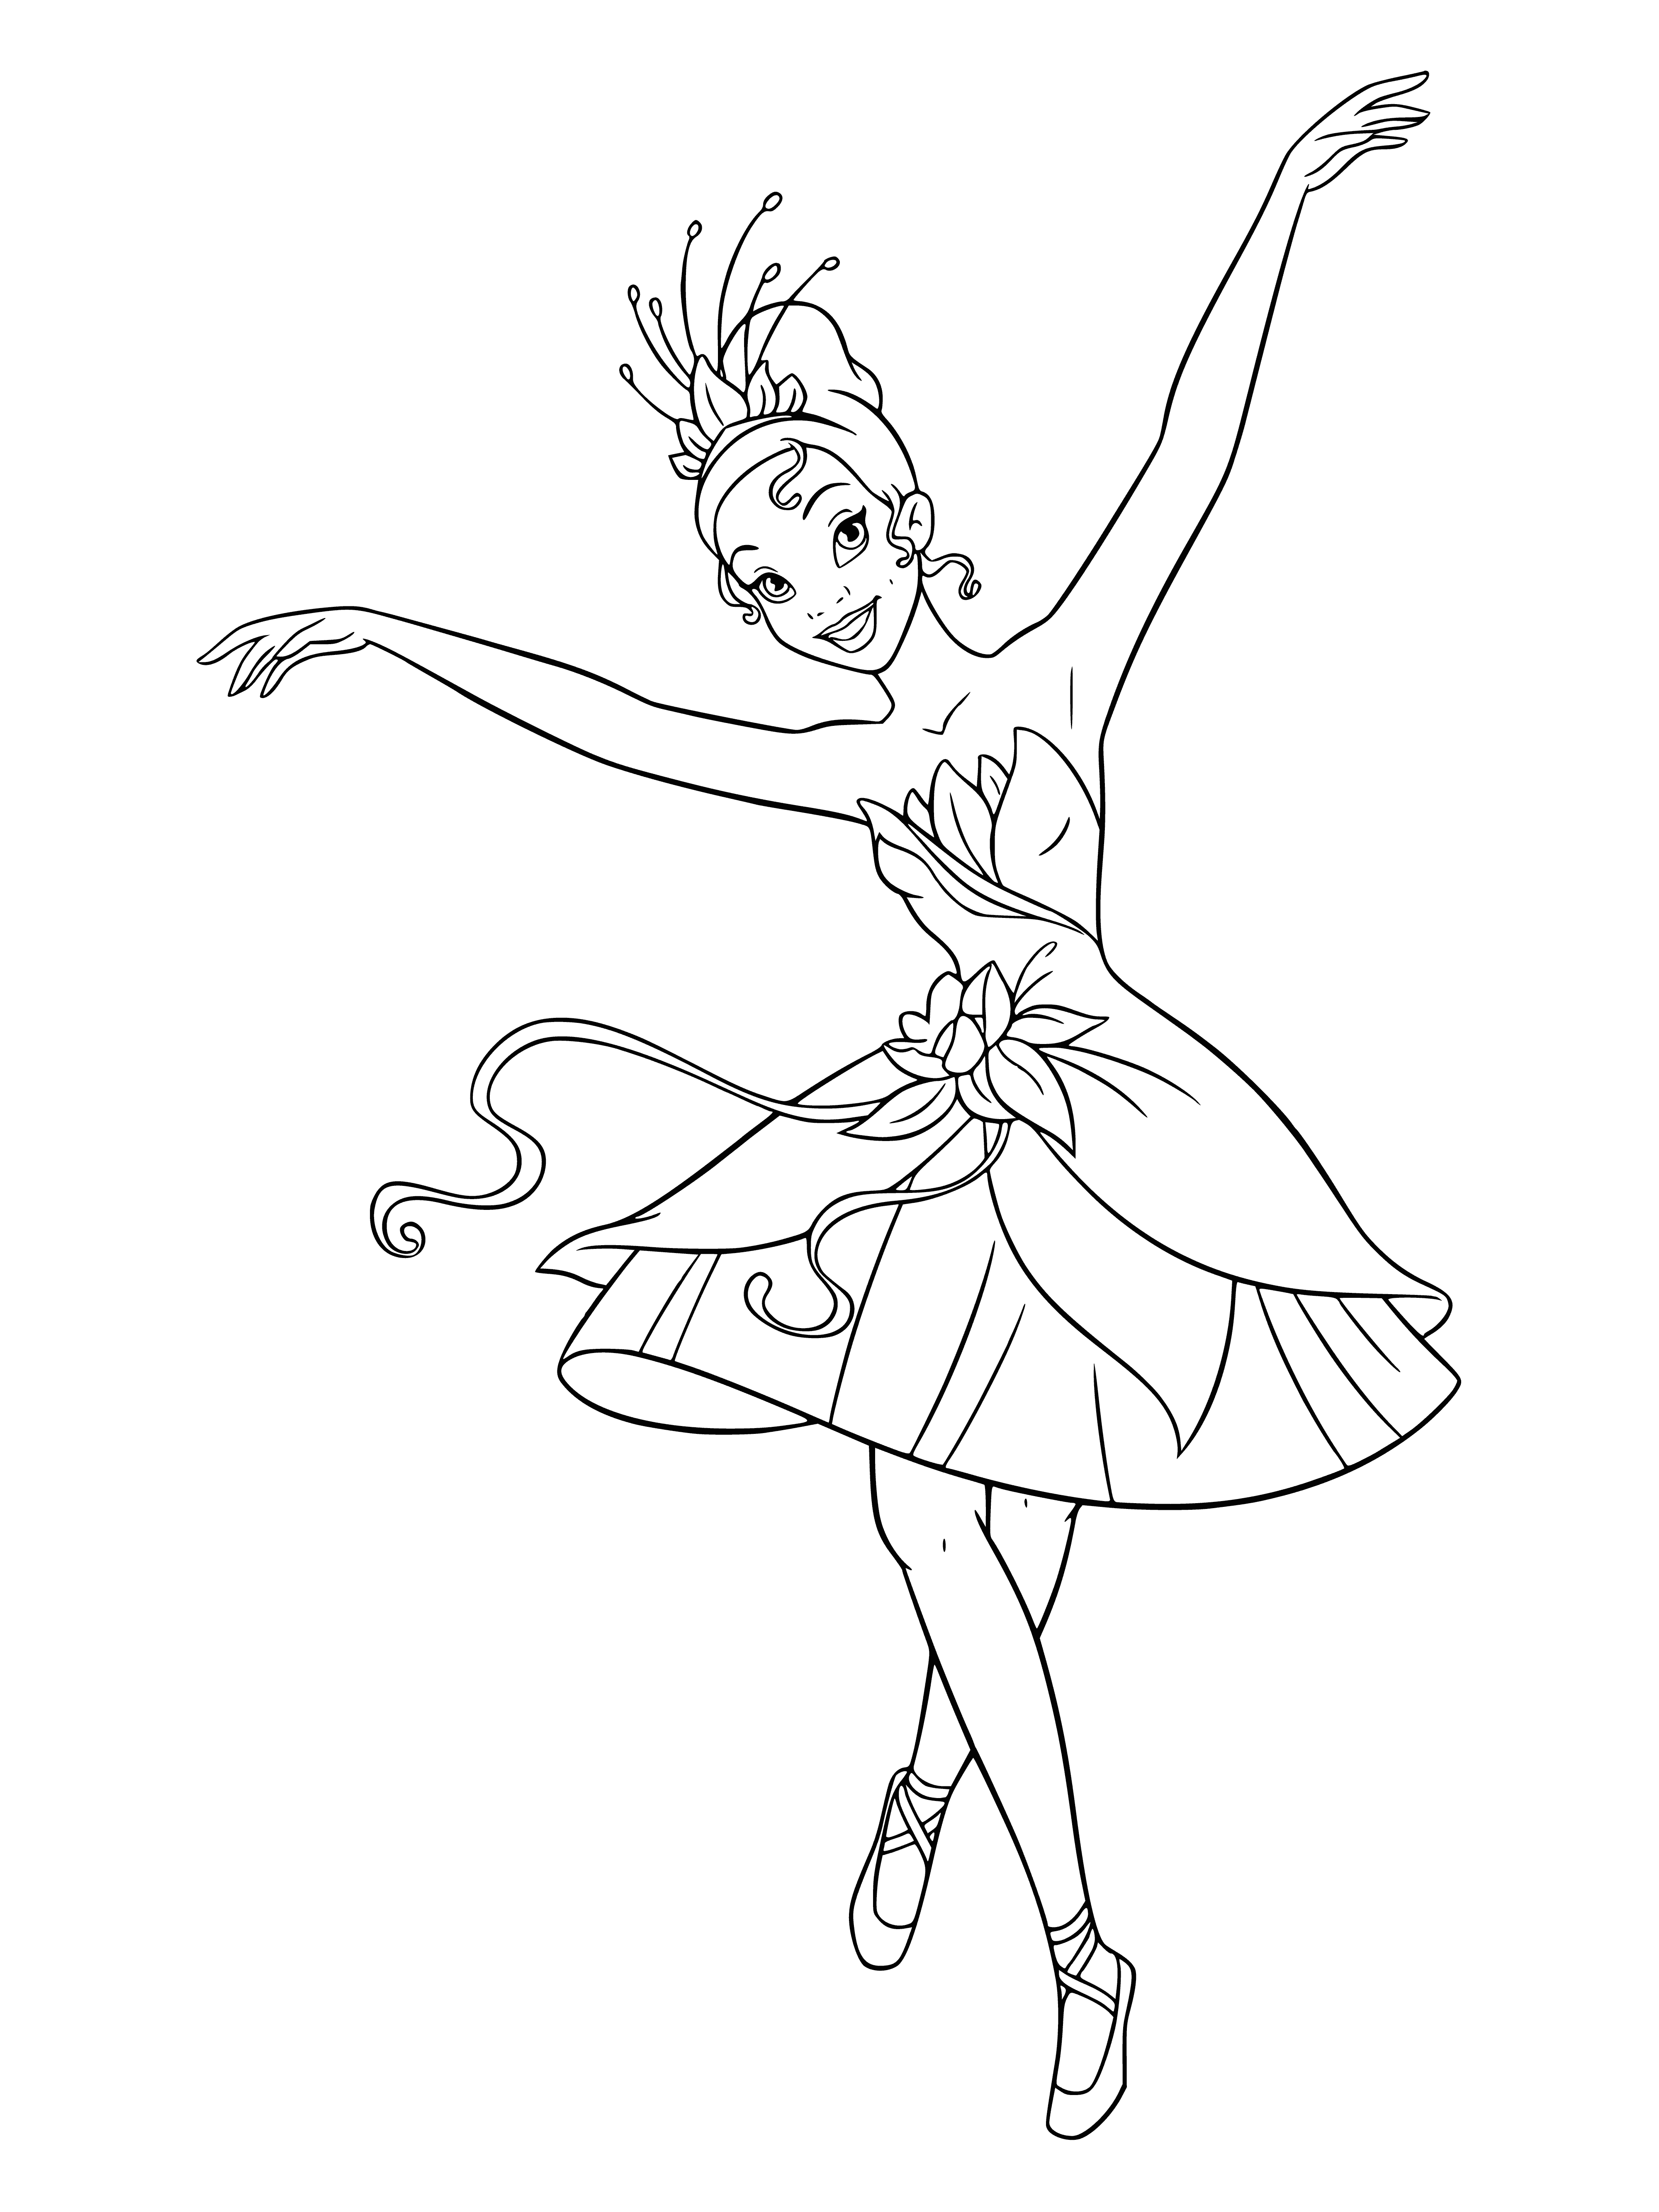 coloring page: Young black woman wearing green dress, white collar, holding handkerchief, smiling with big updo and green shoes.